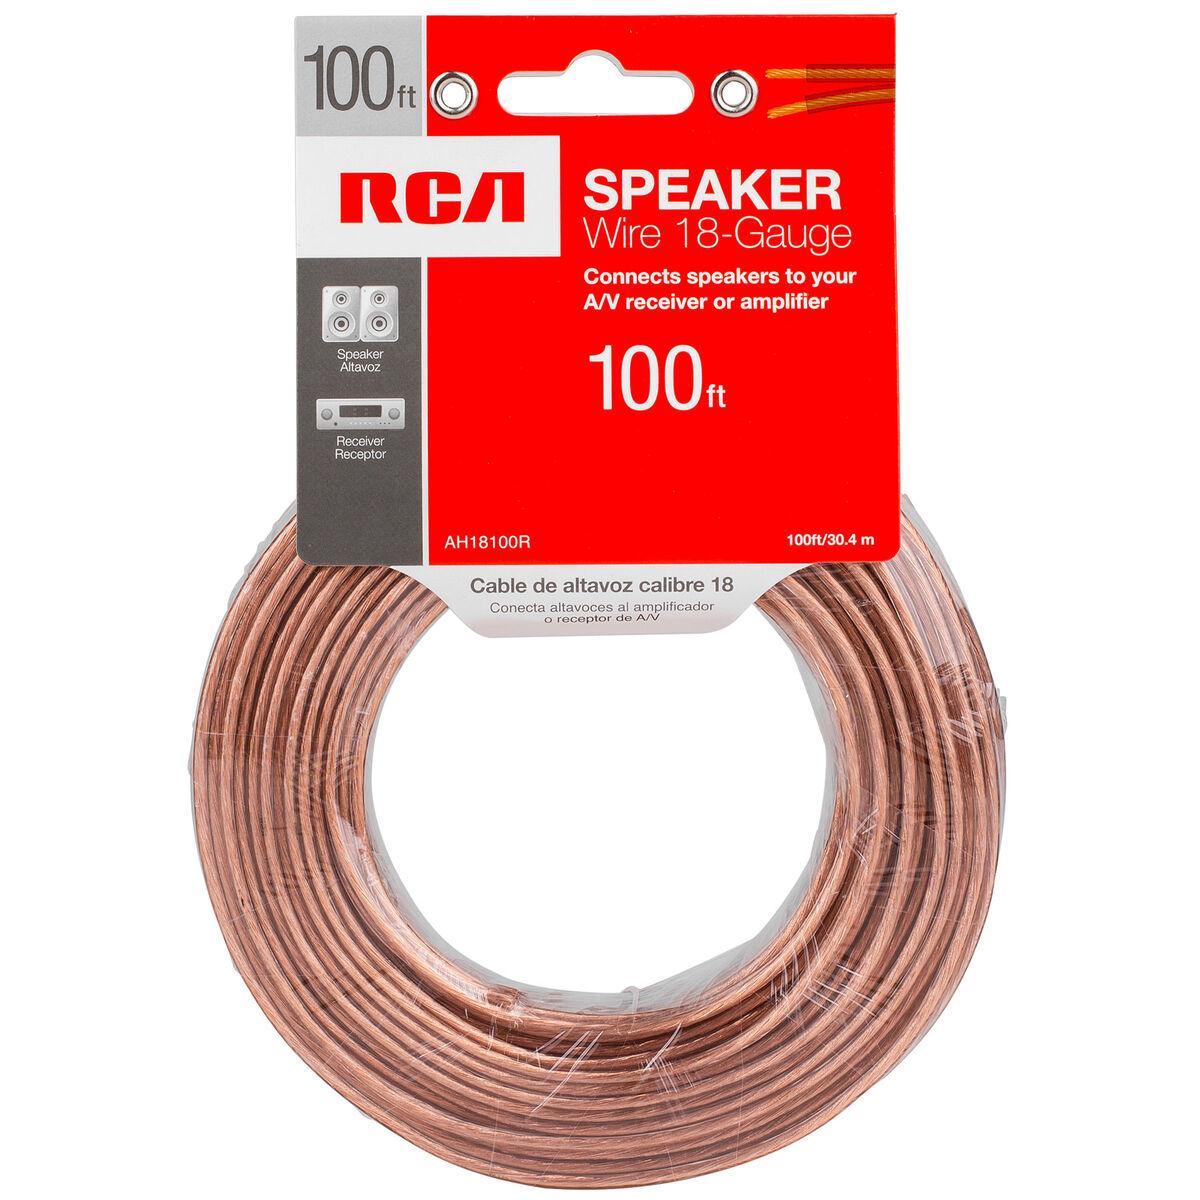 Photos - Cable (video, audio, USB) RCA AH18100SR 18 AWG Speaker Wire 100 ft. 